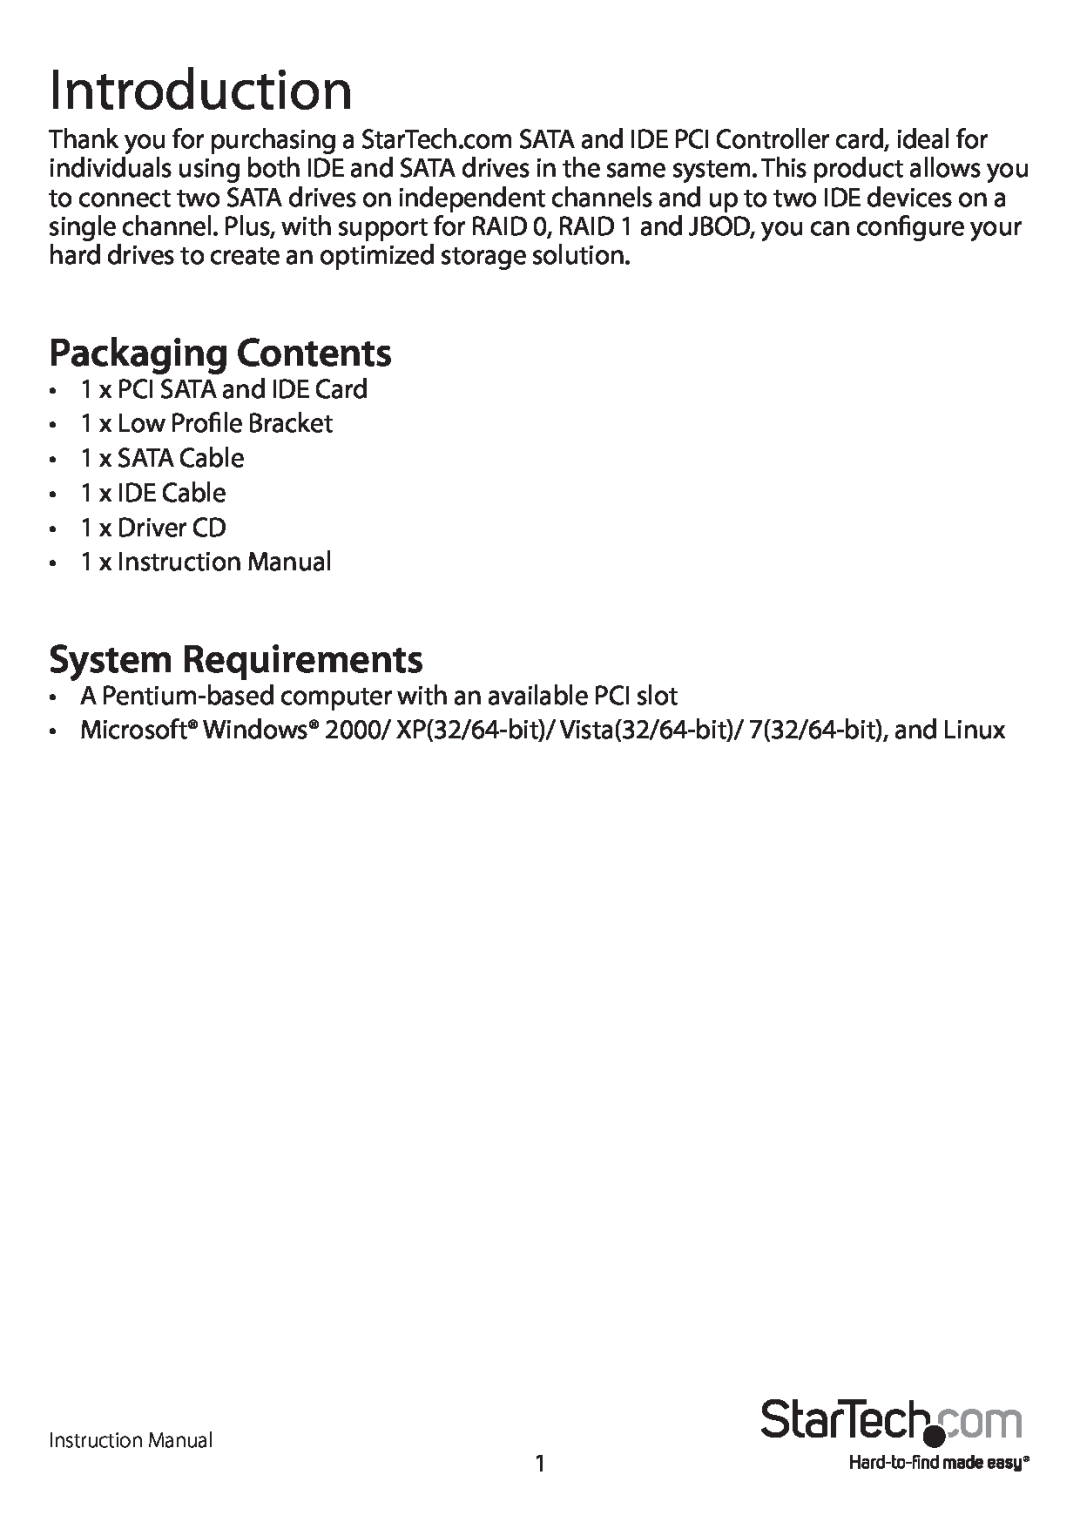 StarTech.com PCISAT2IDE1 manual Introduction, Packaging Contents, System Requirements 